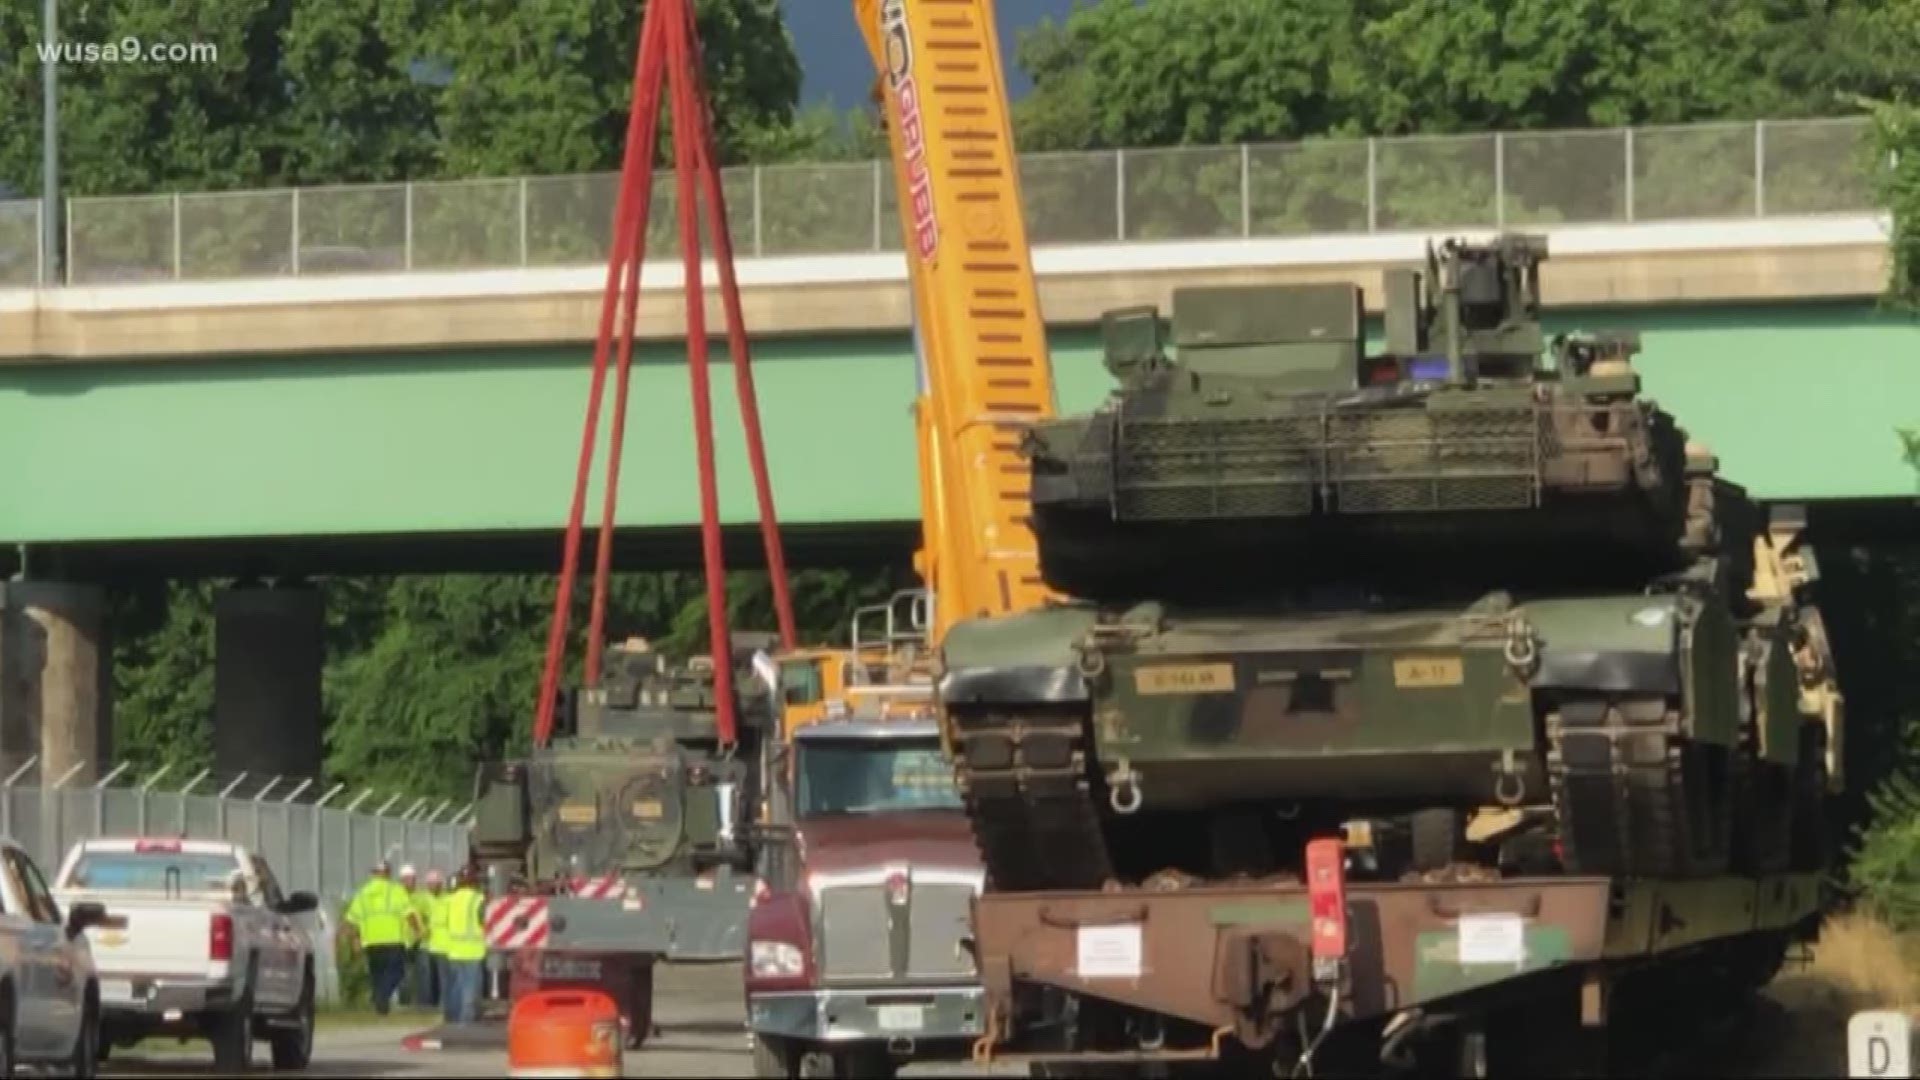 Tanks and armored personnel carriers will be passing through D.C. neighborhoods this week en route to the National Mall for President Trump's 'Salute to America.'